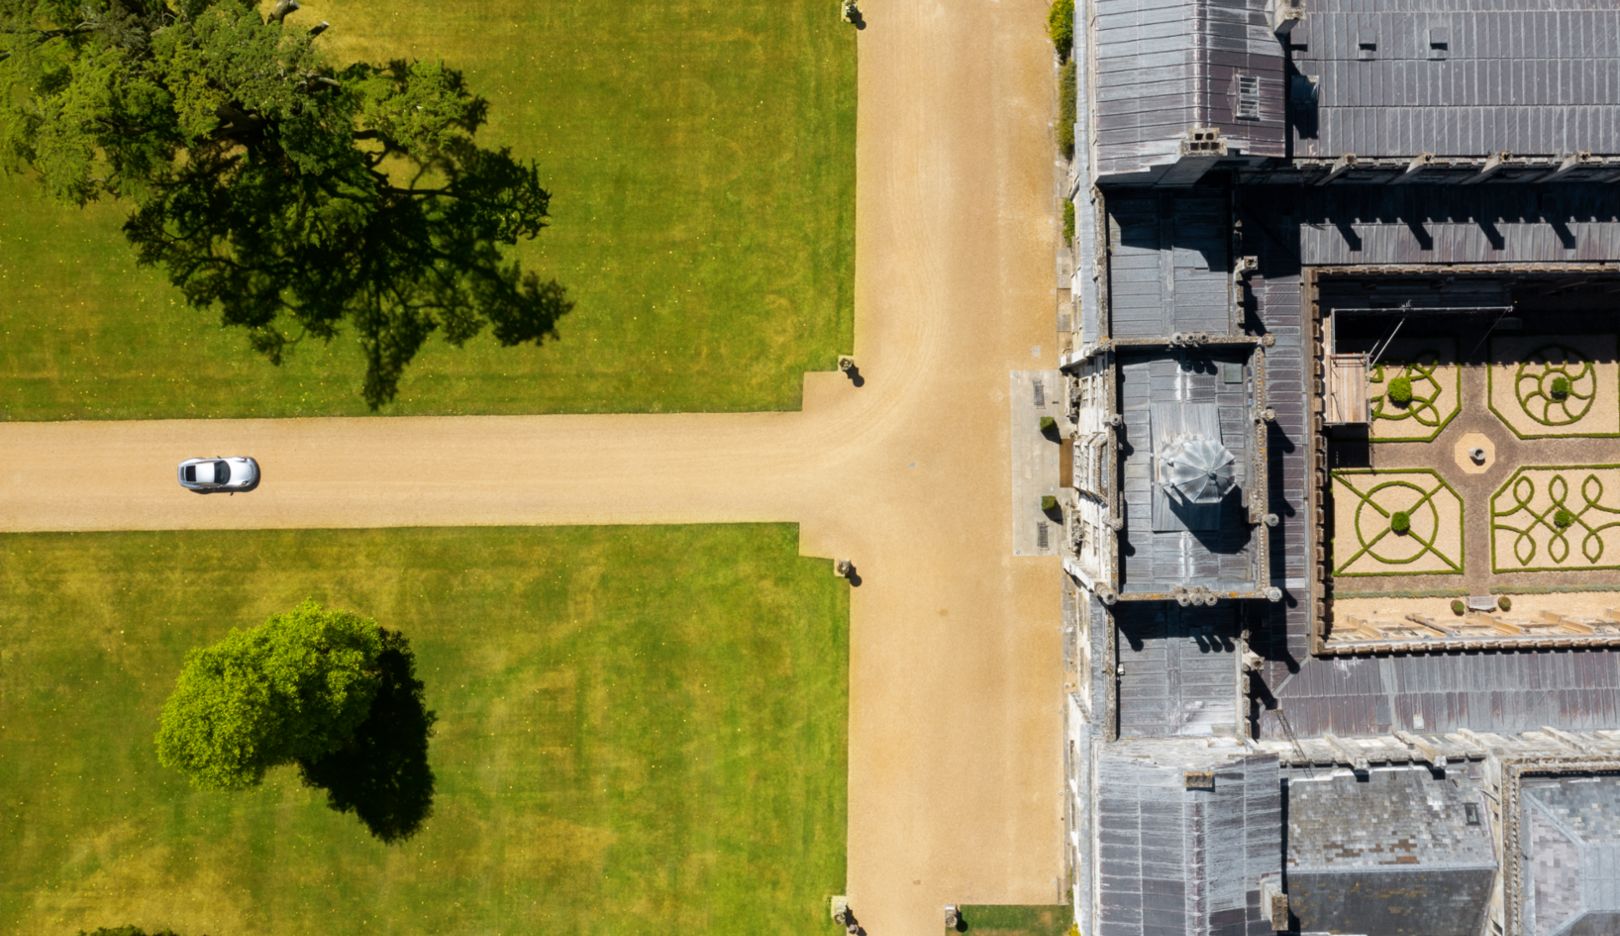 A drone shot shows the immaculately kept courtyard at the center of the stately home.